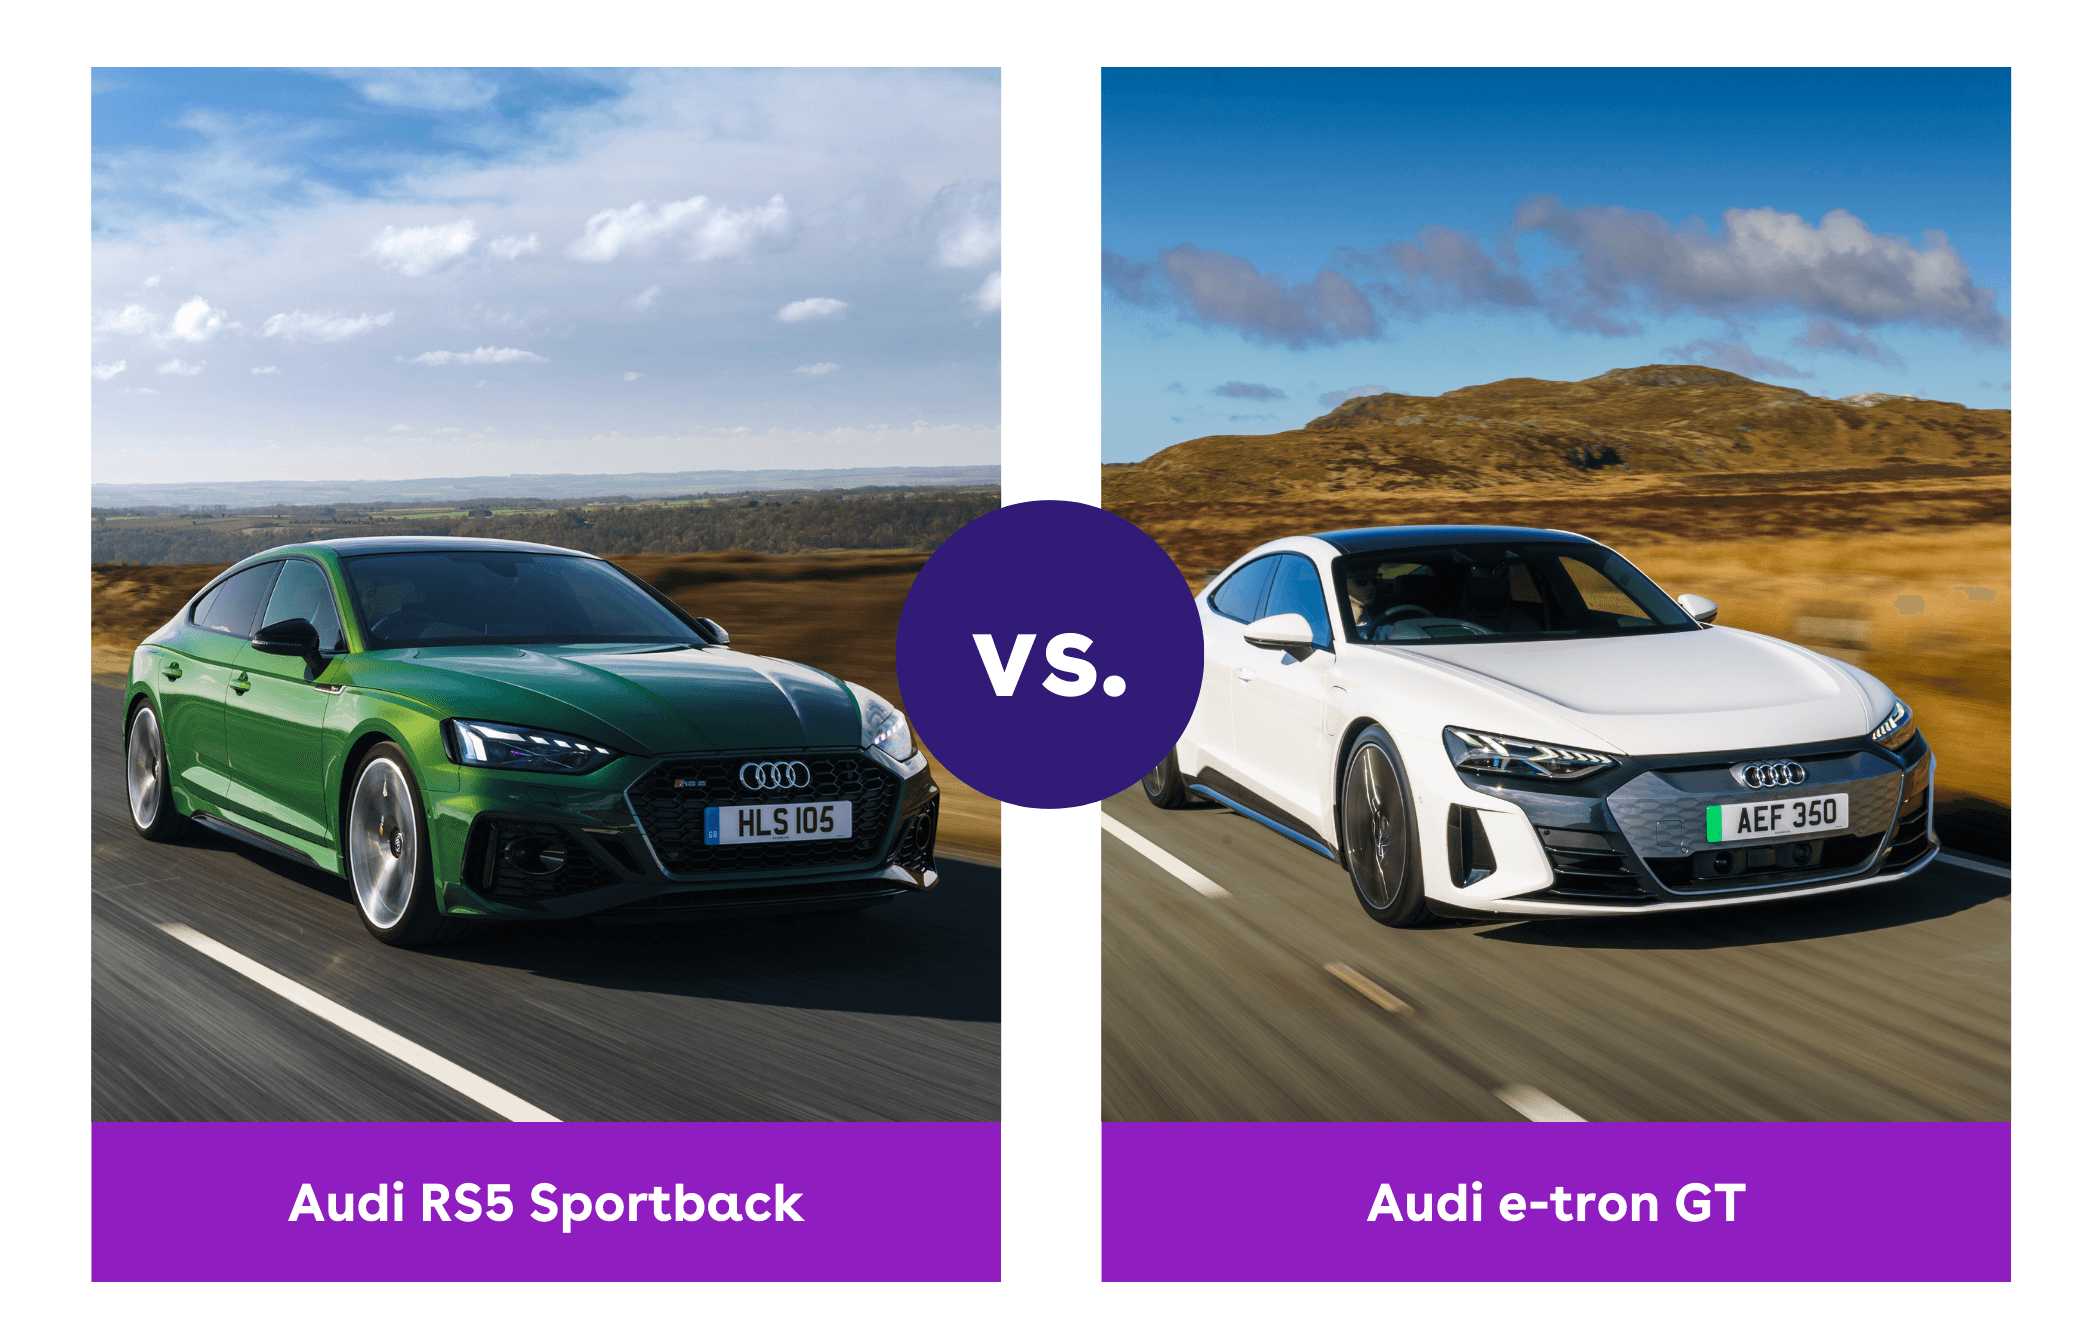 Side-by-side view of Audi RS5 Sportback and Audi e-tron GT driving